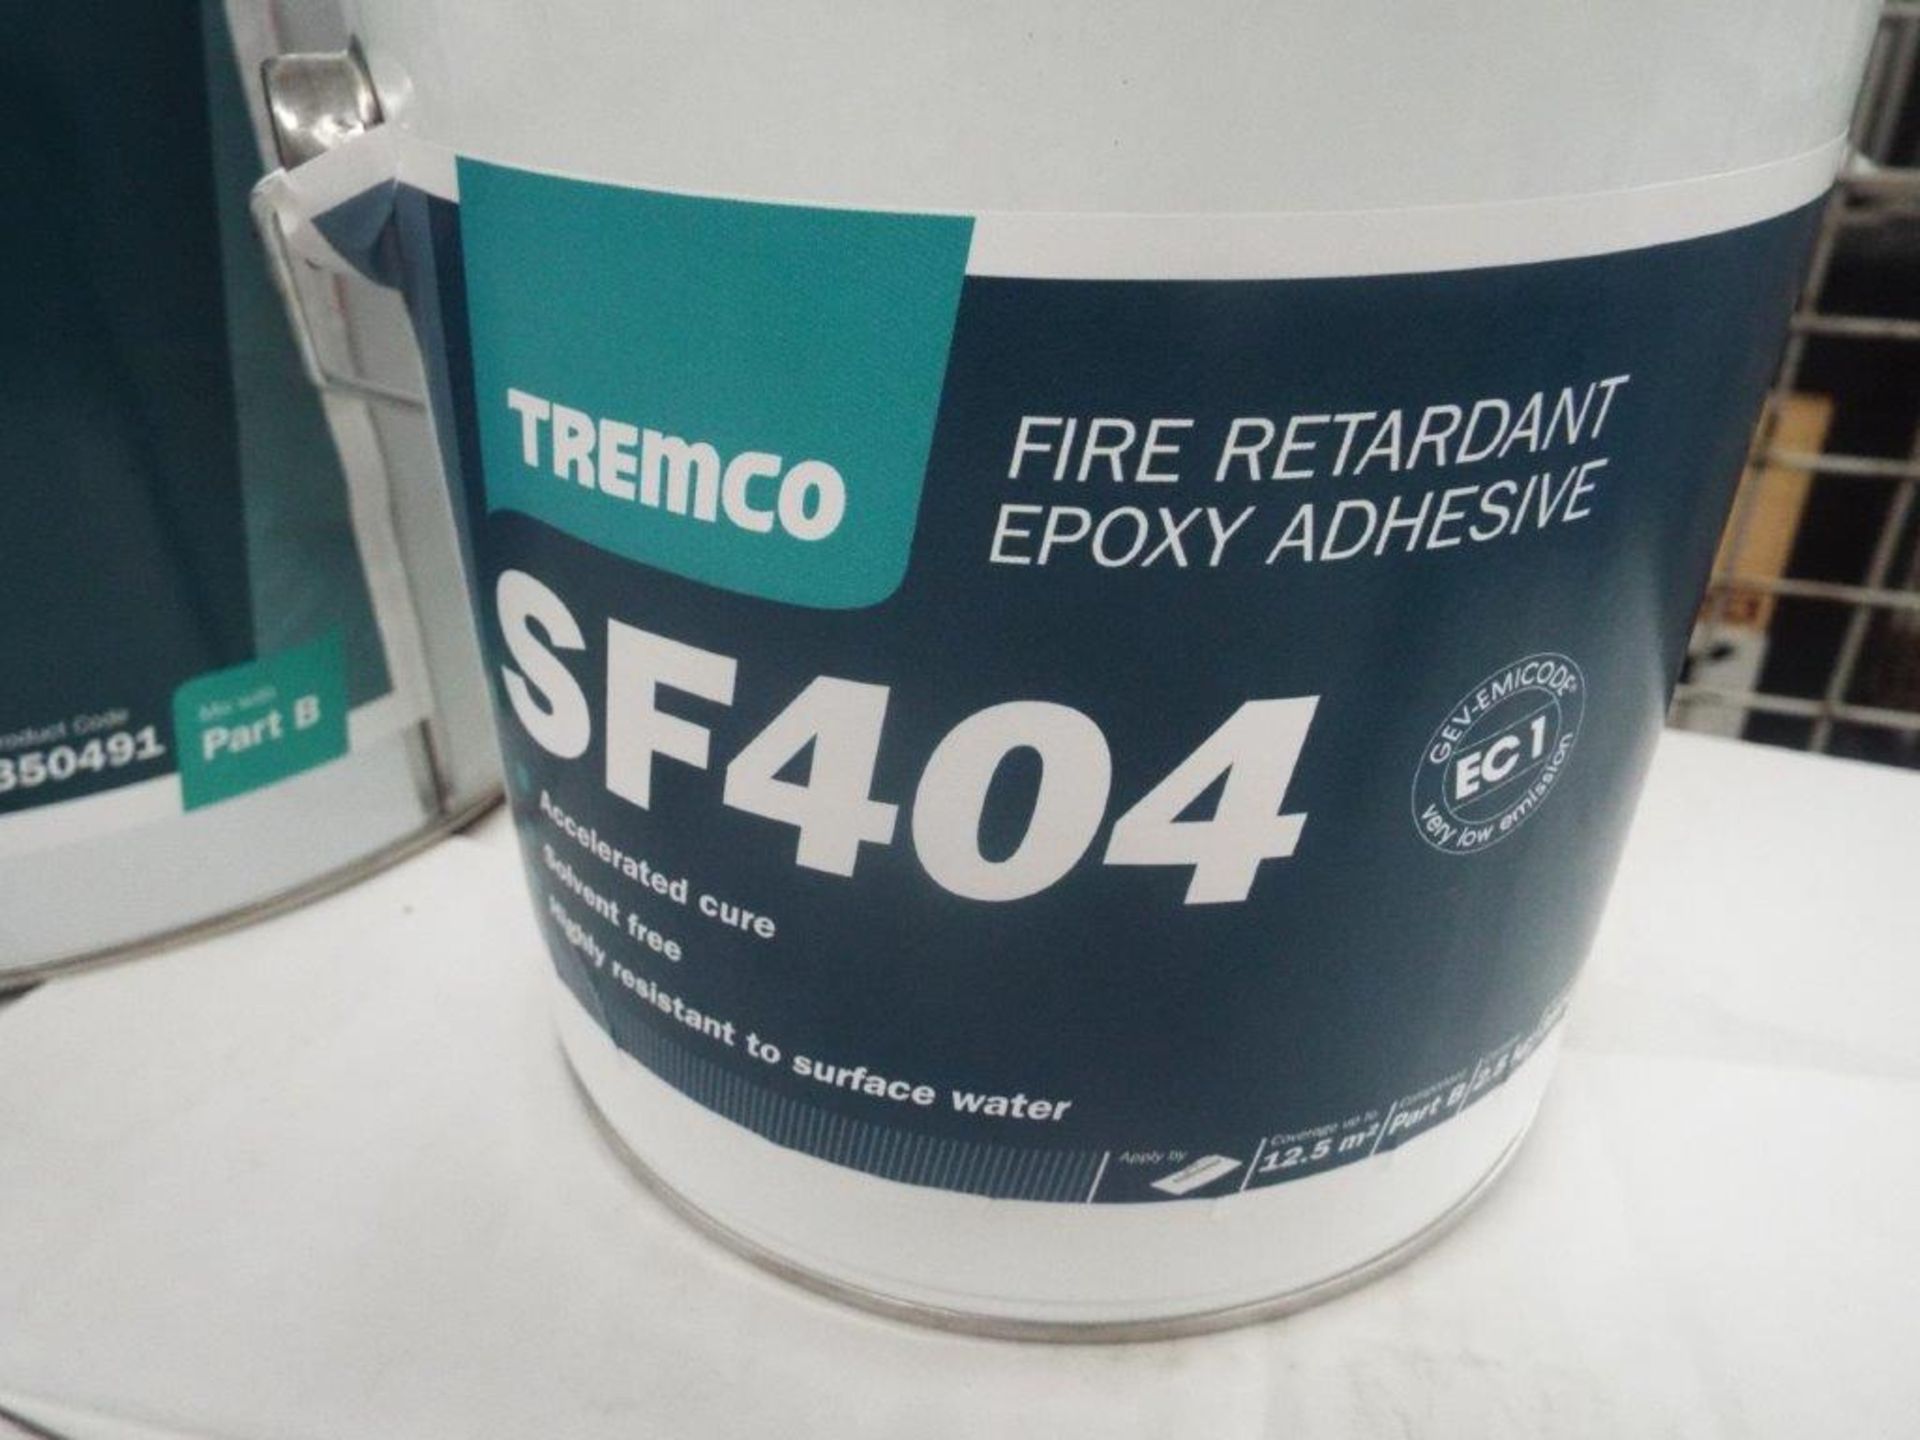 14 x Unissued 5Kg Cans of Tremco SF404 Fire Retardant 2-Part Epoxy Adhesive - Image 3 of 4